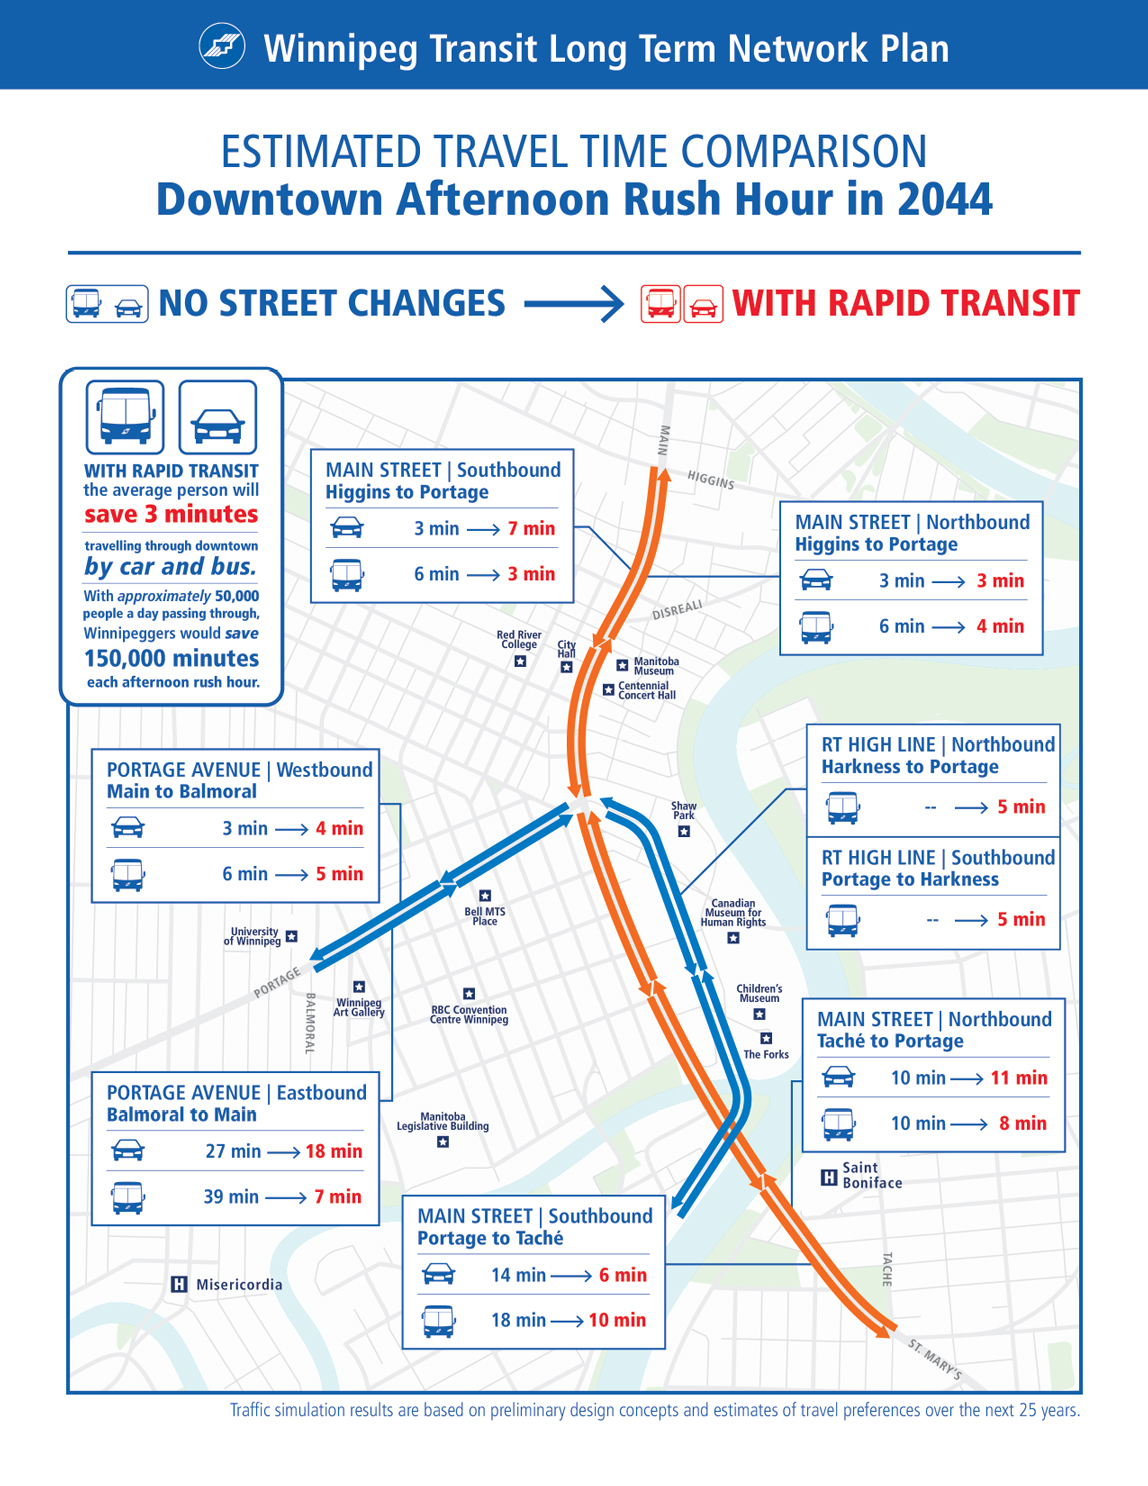  An illustration showing estimated travel time comparisons in Downtown afternoon rush hour in 2044. The comparison is between travel times with no street changes and with rapid transit. With rapid transit, the average person will save 3 minutes travelling Downtown by car and bus. With approximately 50,000 people a day passing through, Winnipeggers would save 150,000 minutes each afternoon rush hour.